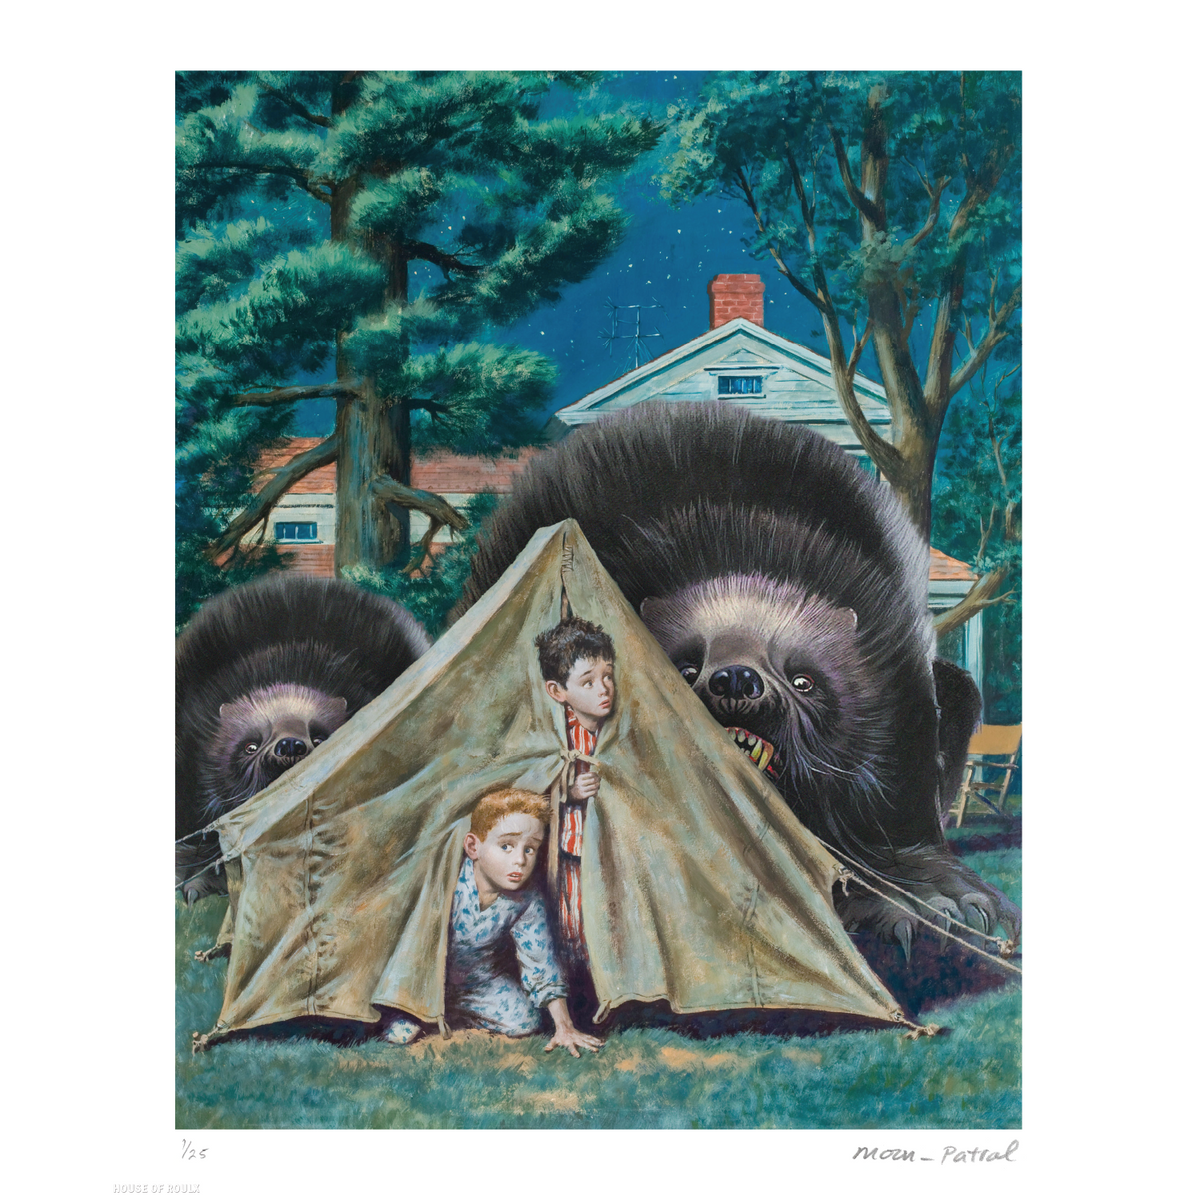 Moon Patrol &quot;The Last Campout I&quot; - Archival Print, Limited Edition of 25 - 14 x 17&quot;